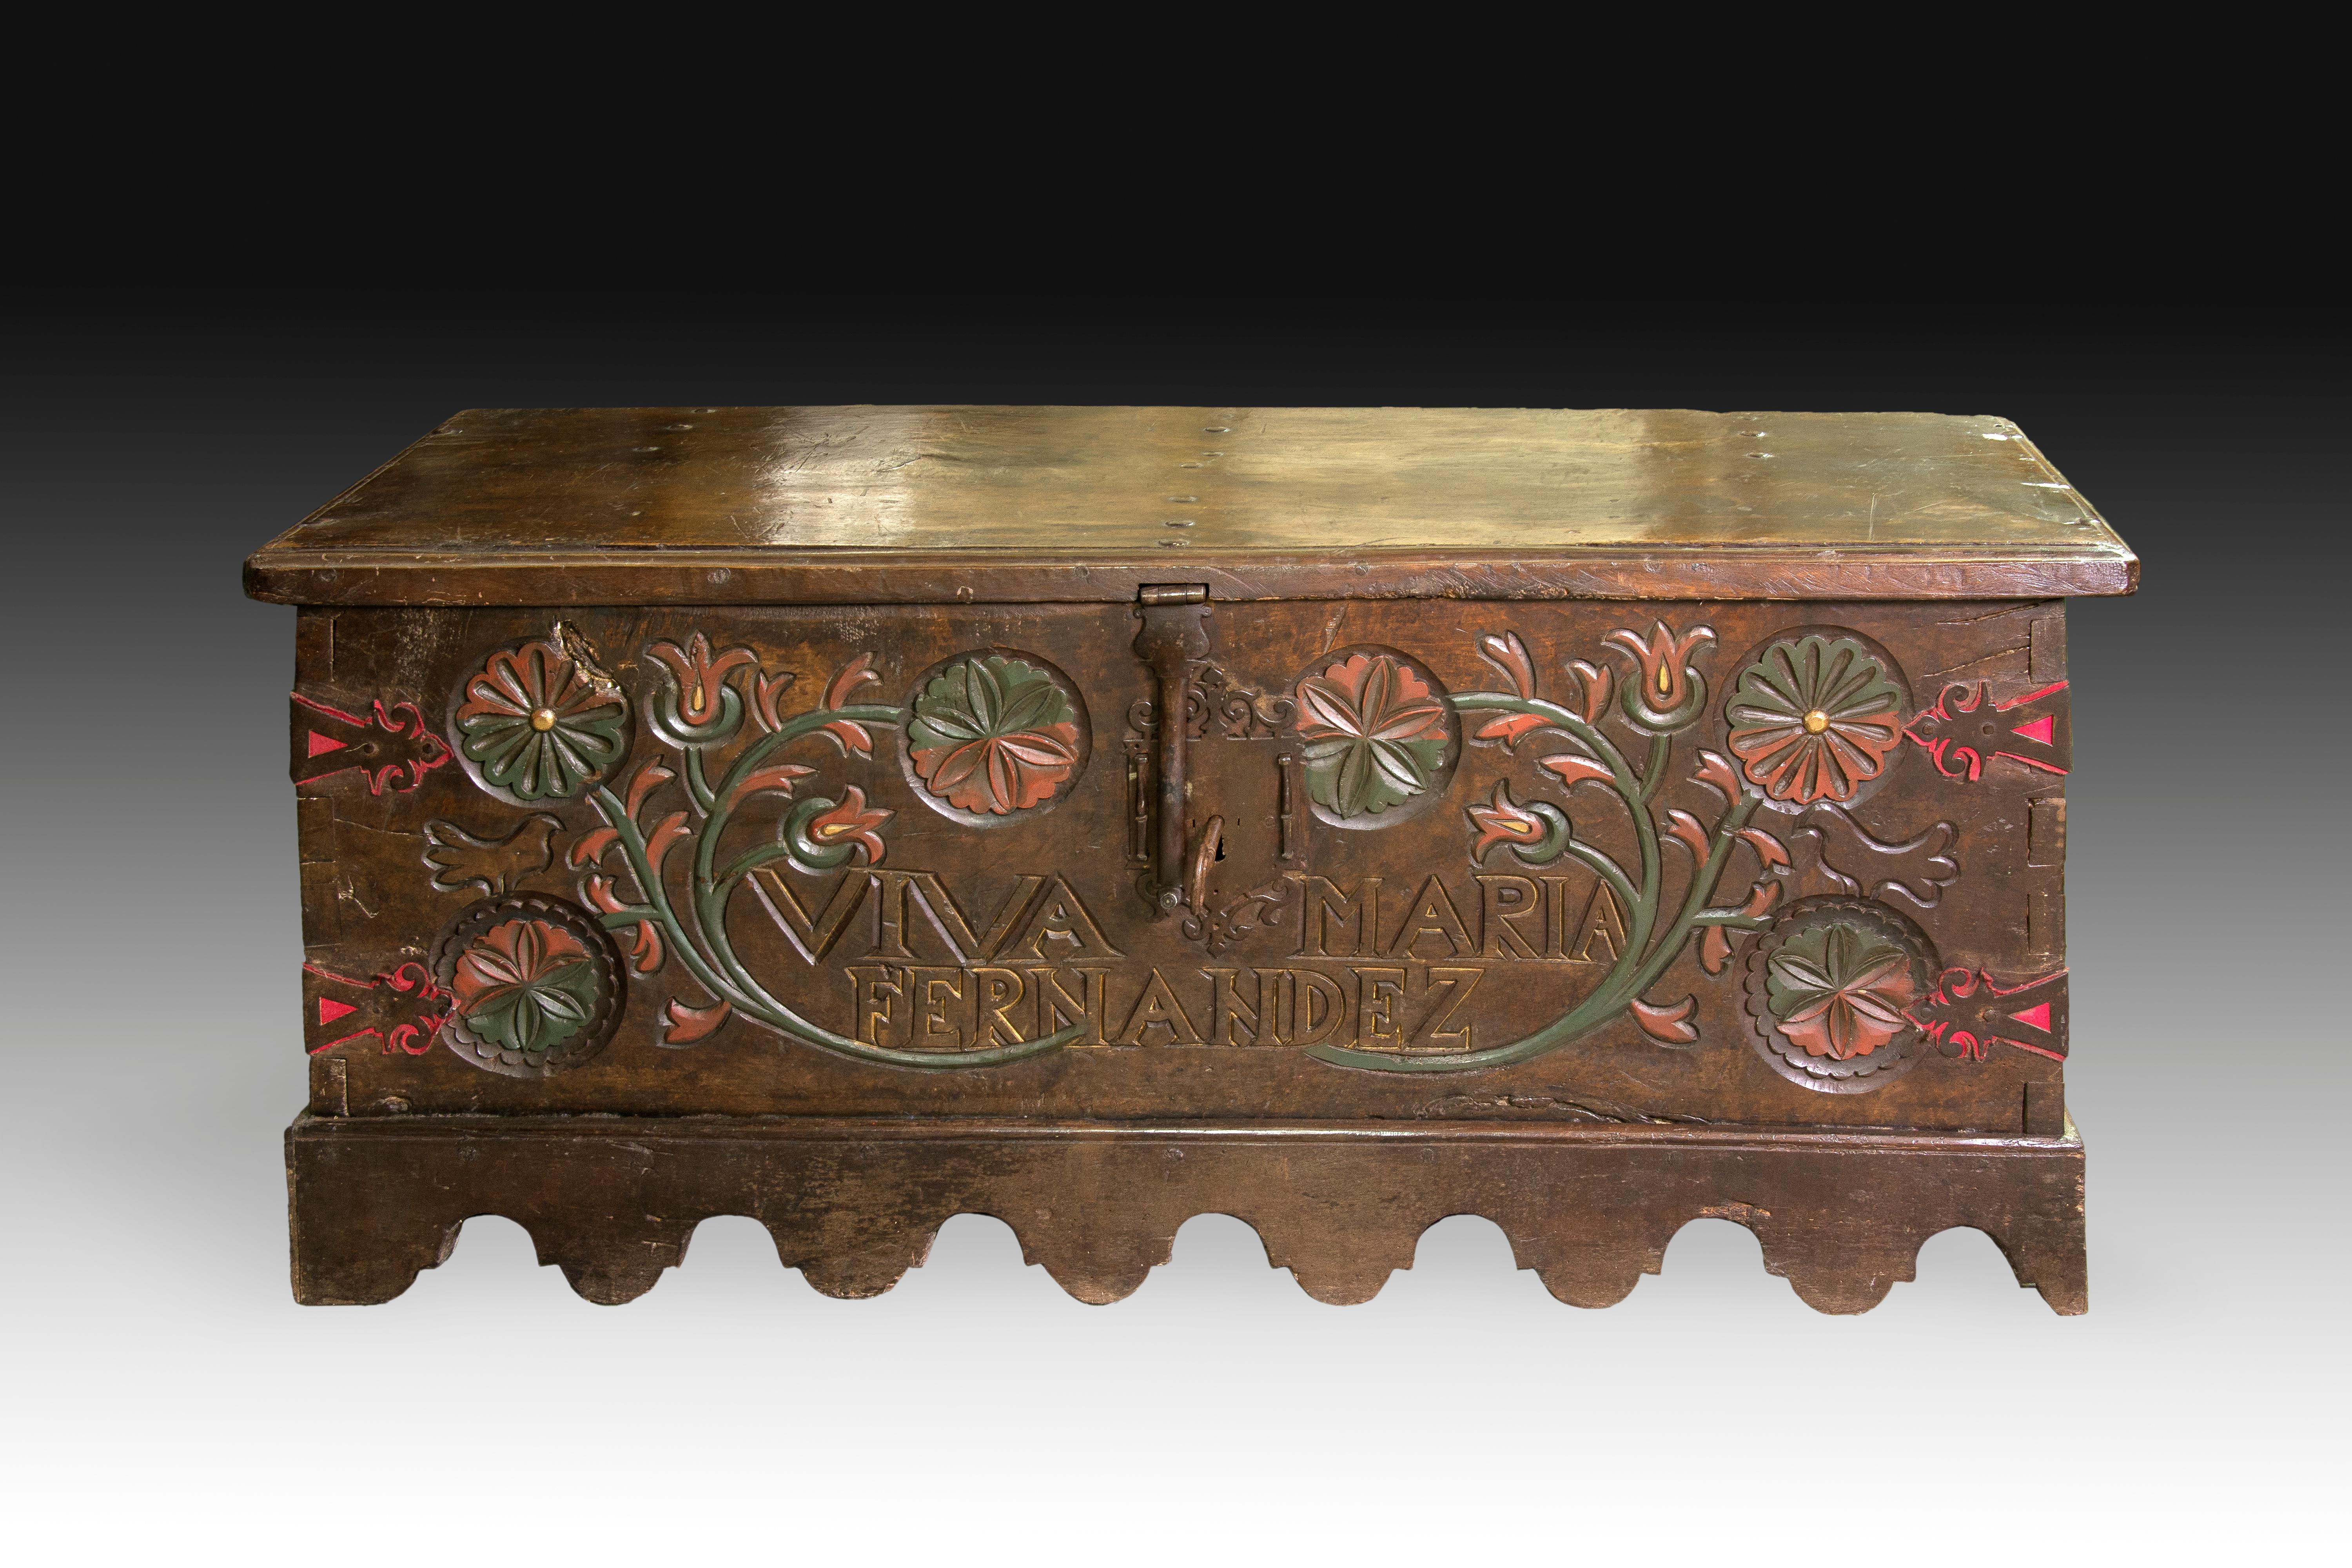 Wedding chest. Wood, textile, metal, polychrome. Salamanca, Spain, 17th century.
Area of rectangular body with flat top made in carved wood that preserves remains of original polychrome, corners and other metal fittings and textile details in